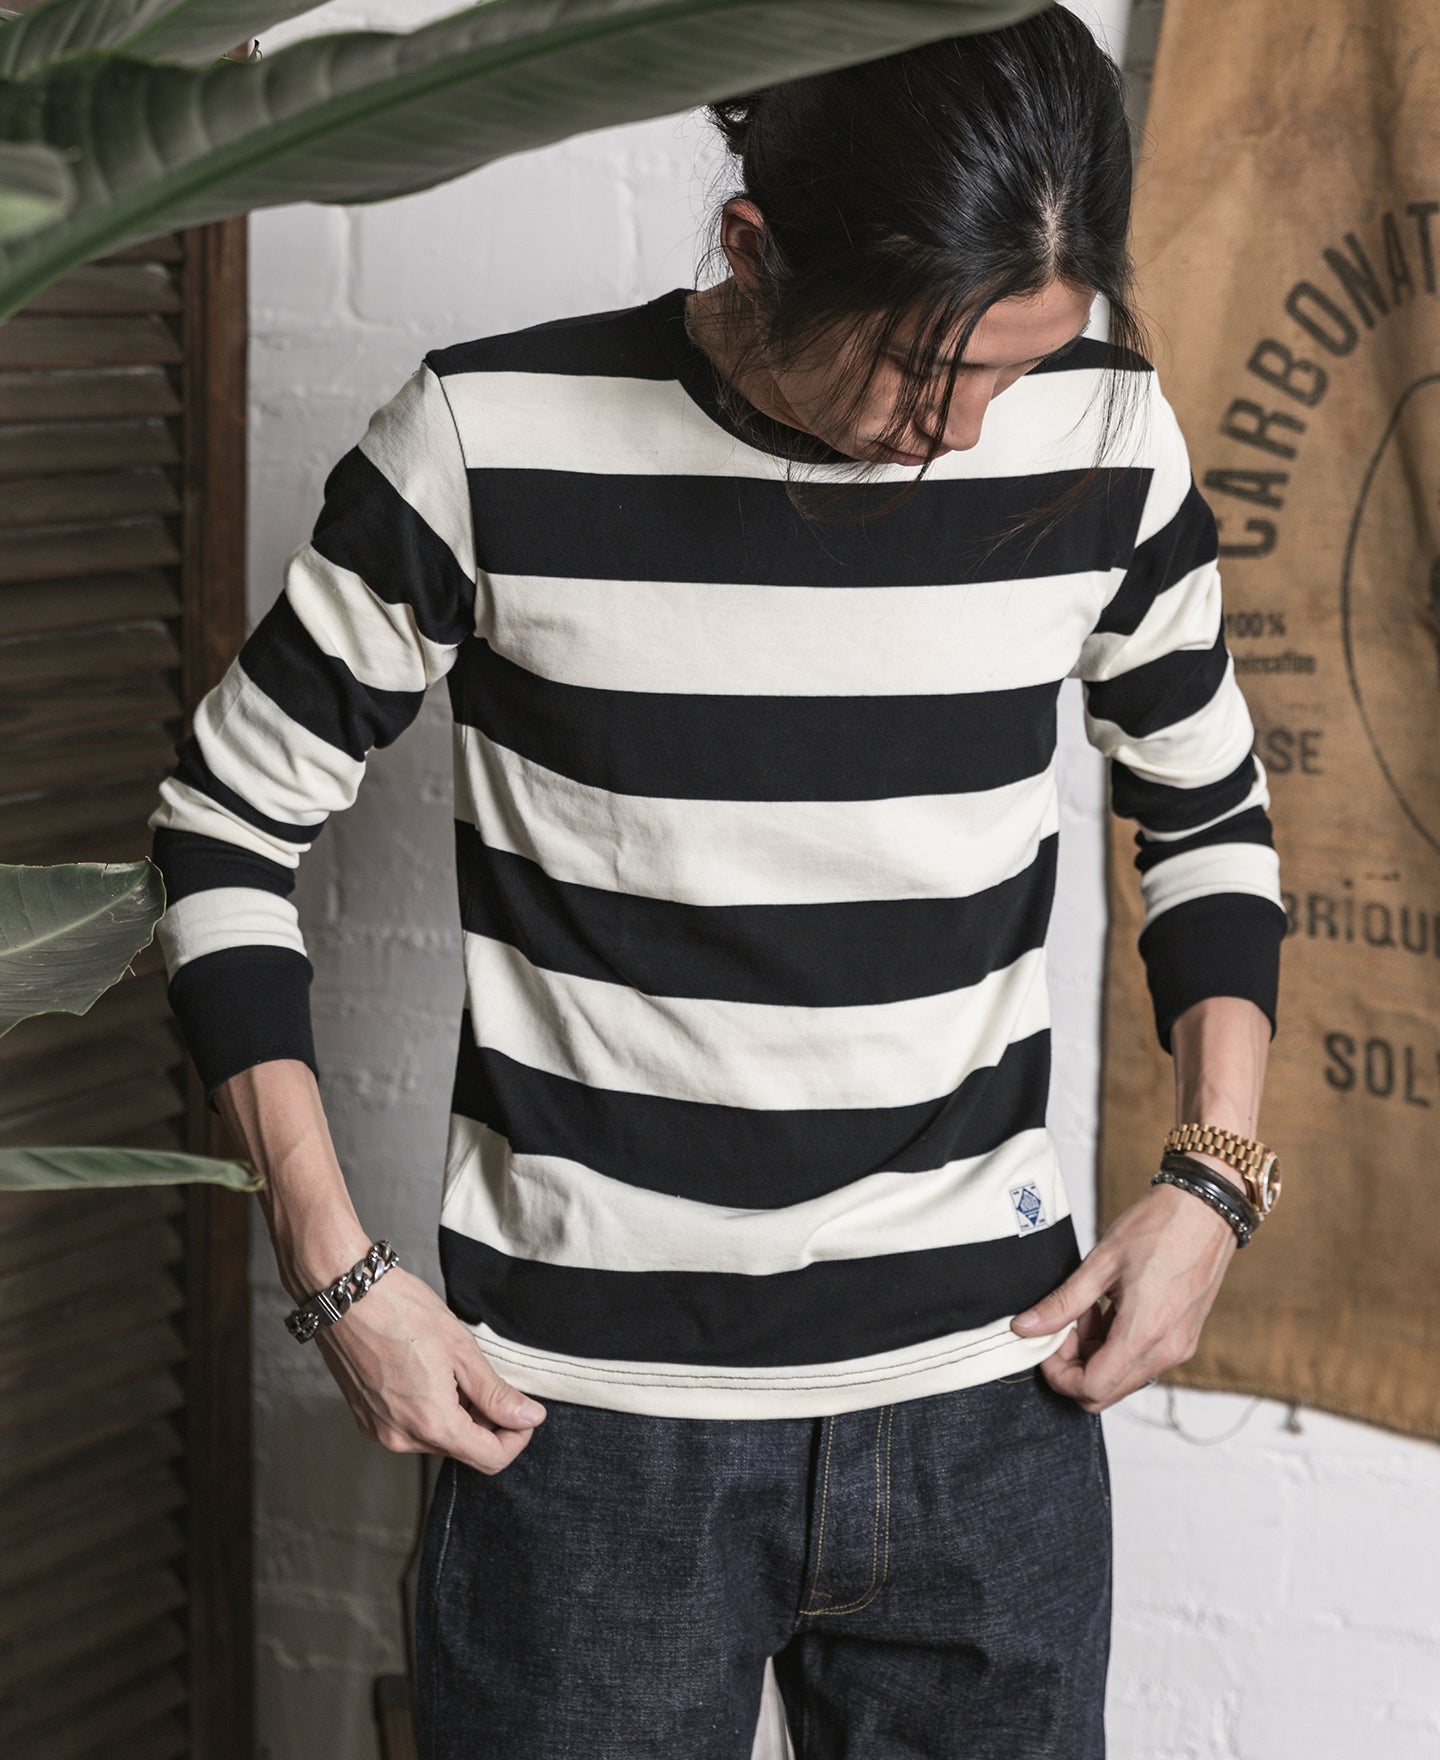 Non Stock Motorcycle Wide Black and White Striped Long Sleeve T-Shirt | Bronson Black/White / S